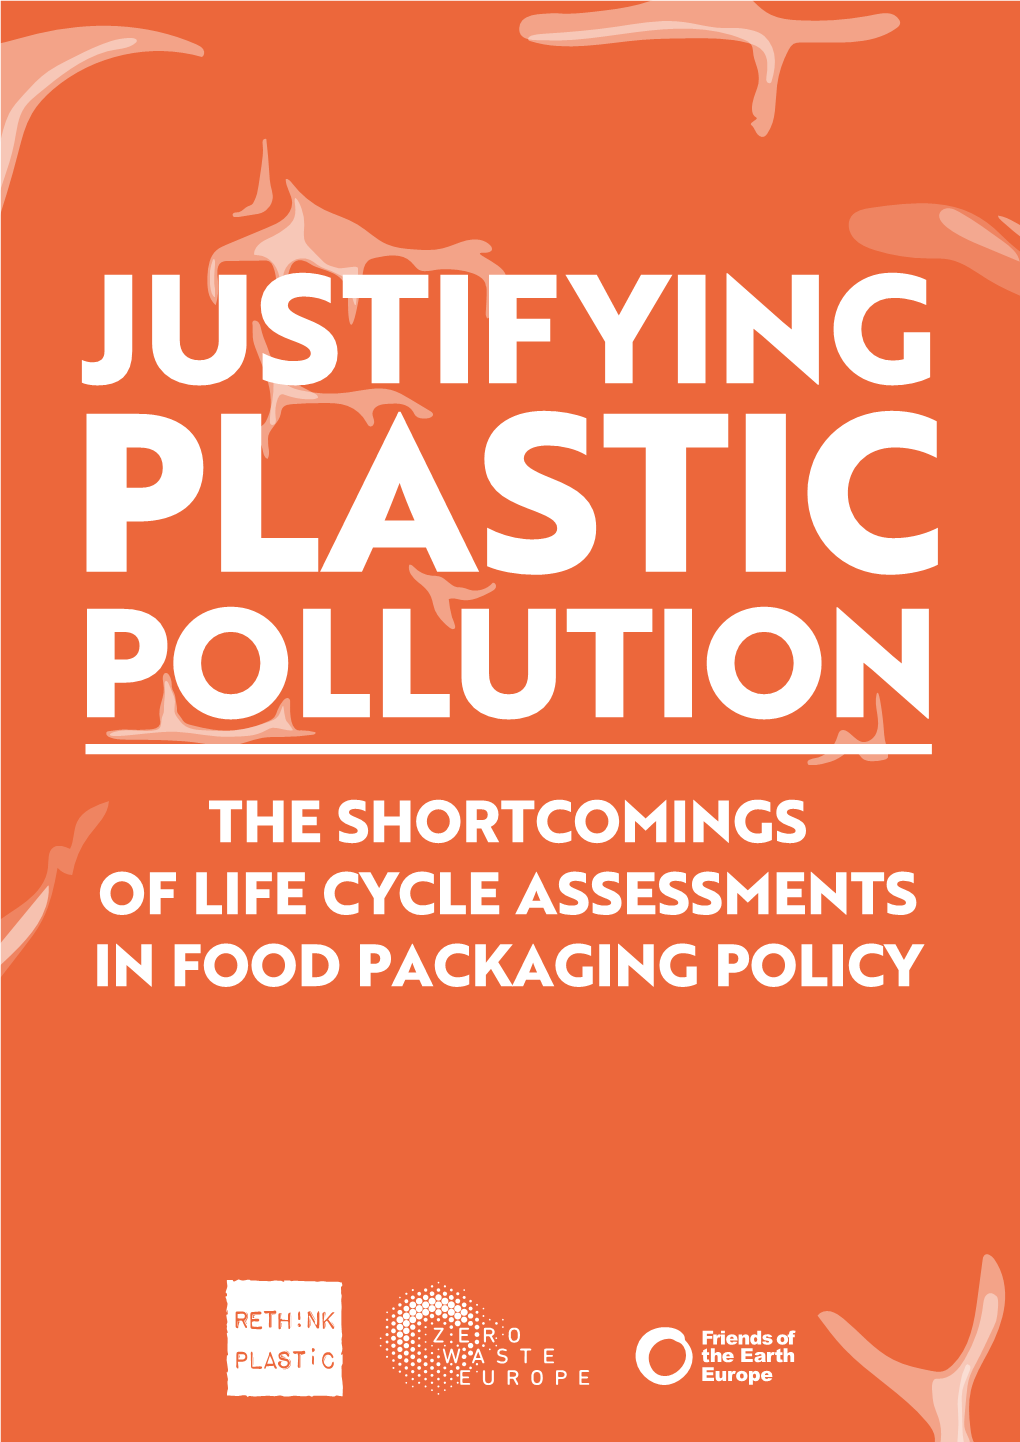 The Shortcomings of Life Cycle Assessments in Food Packaging Policy